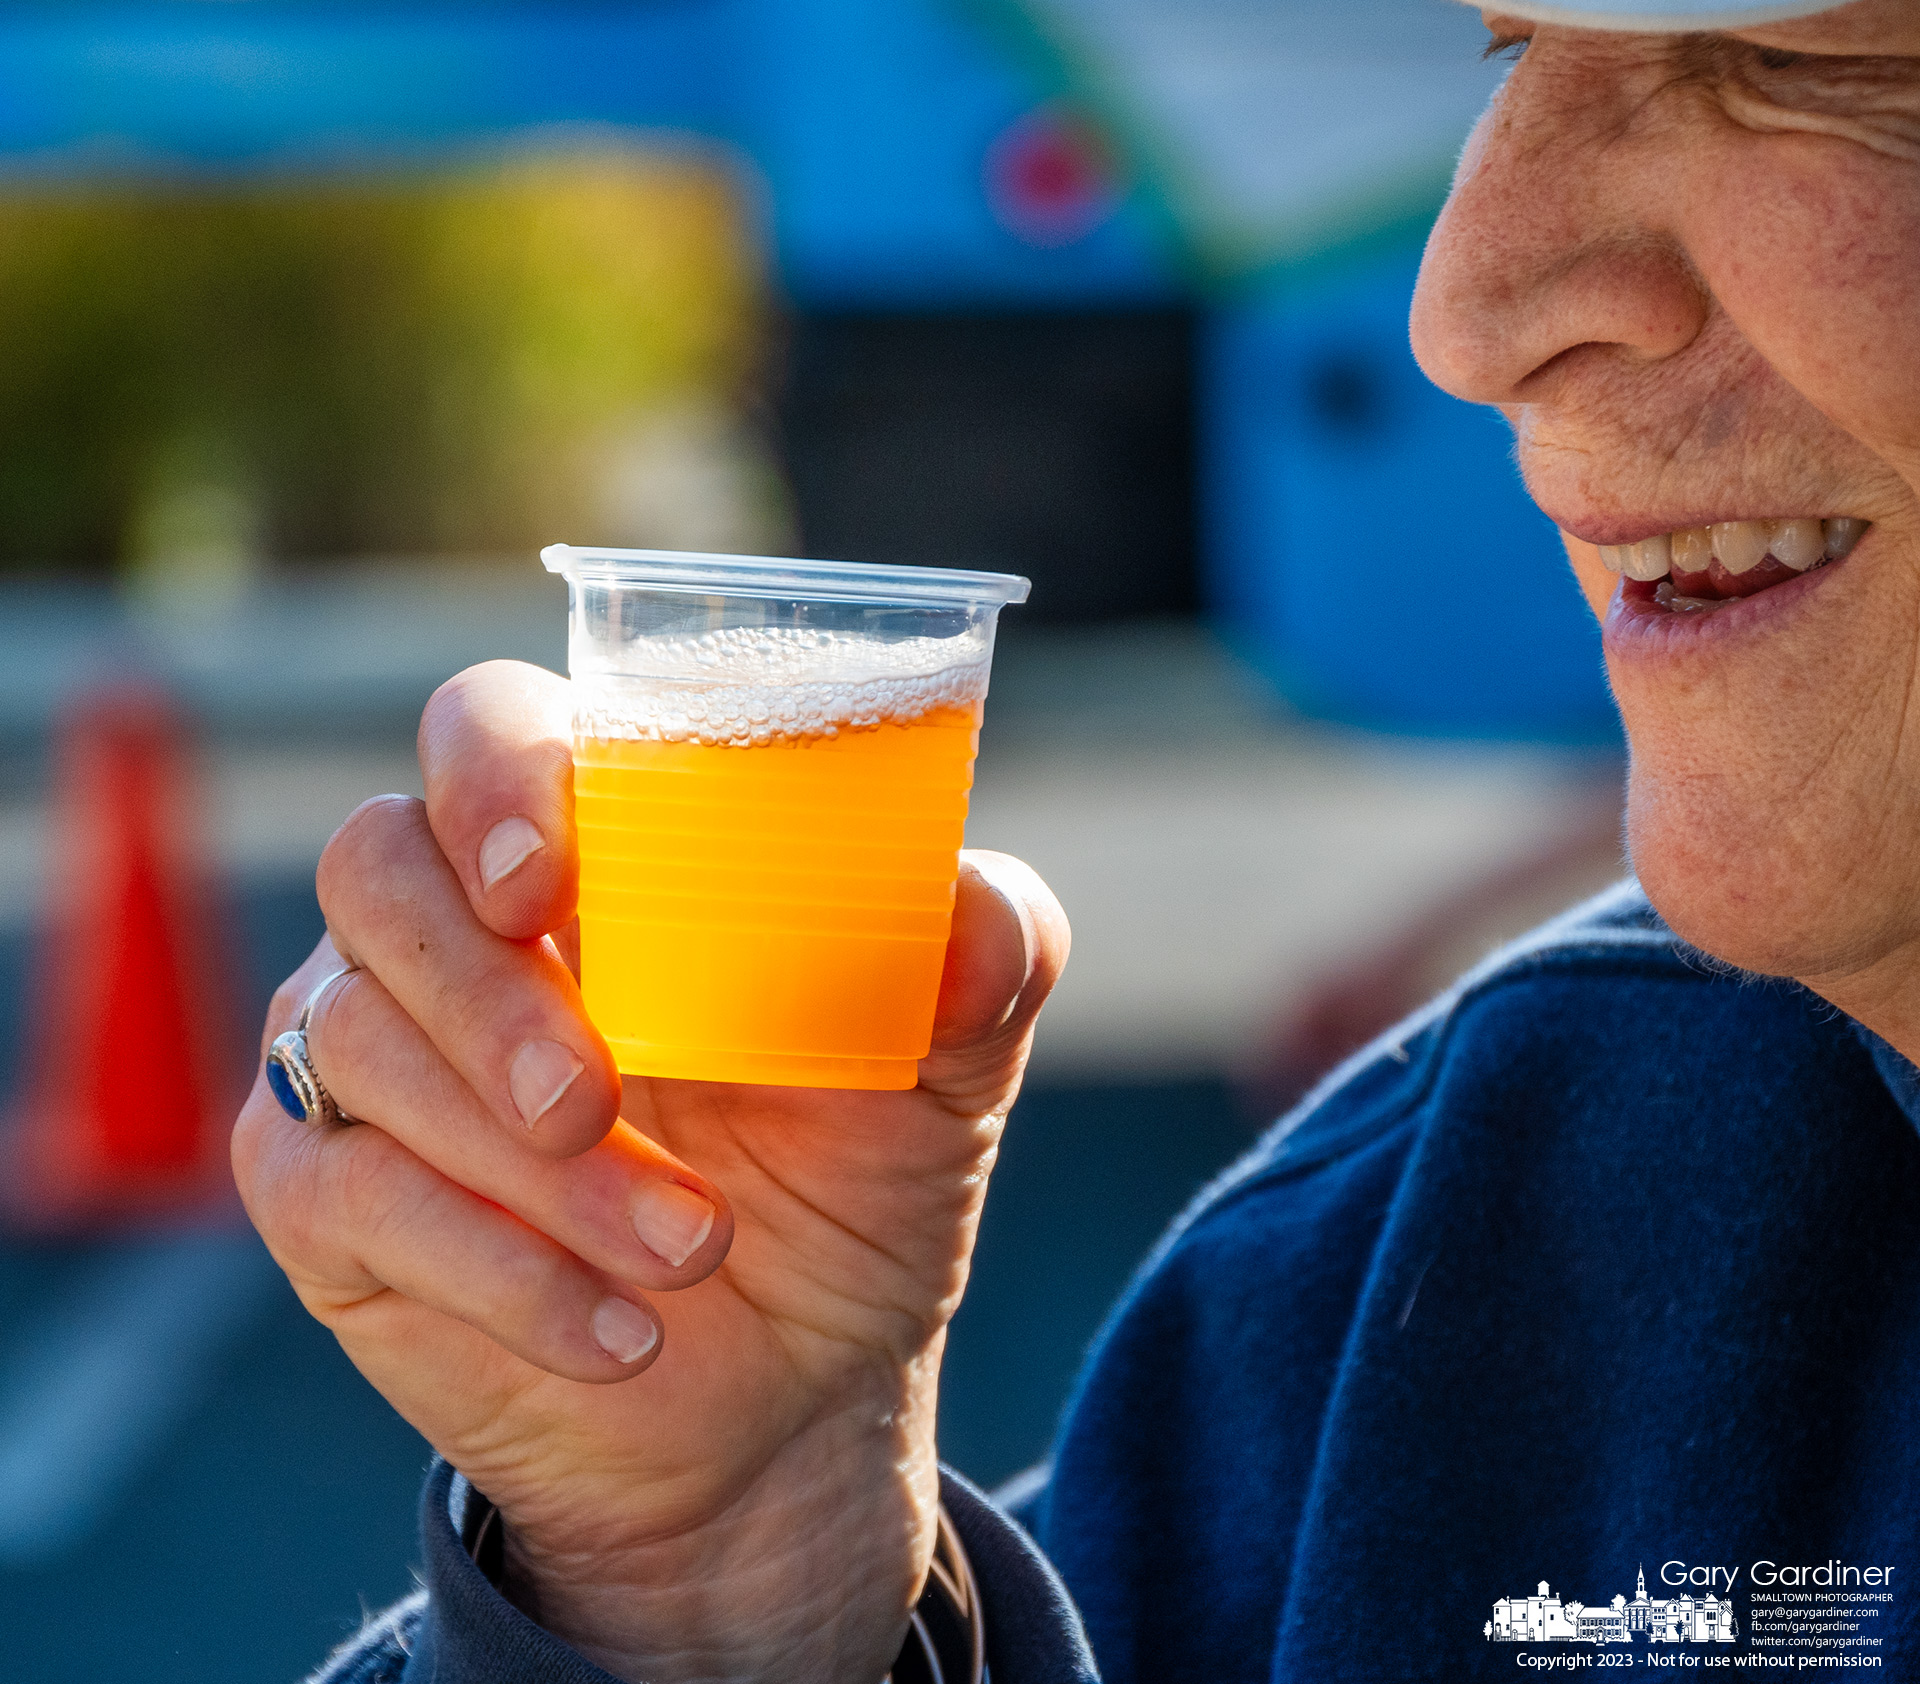 A man smiles after toasting a friend with a sample cup of apple cider from an Amish farm at the last Saturday Farmers Market of the season in Westerville. My Final Photo for September 30, 2023.